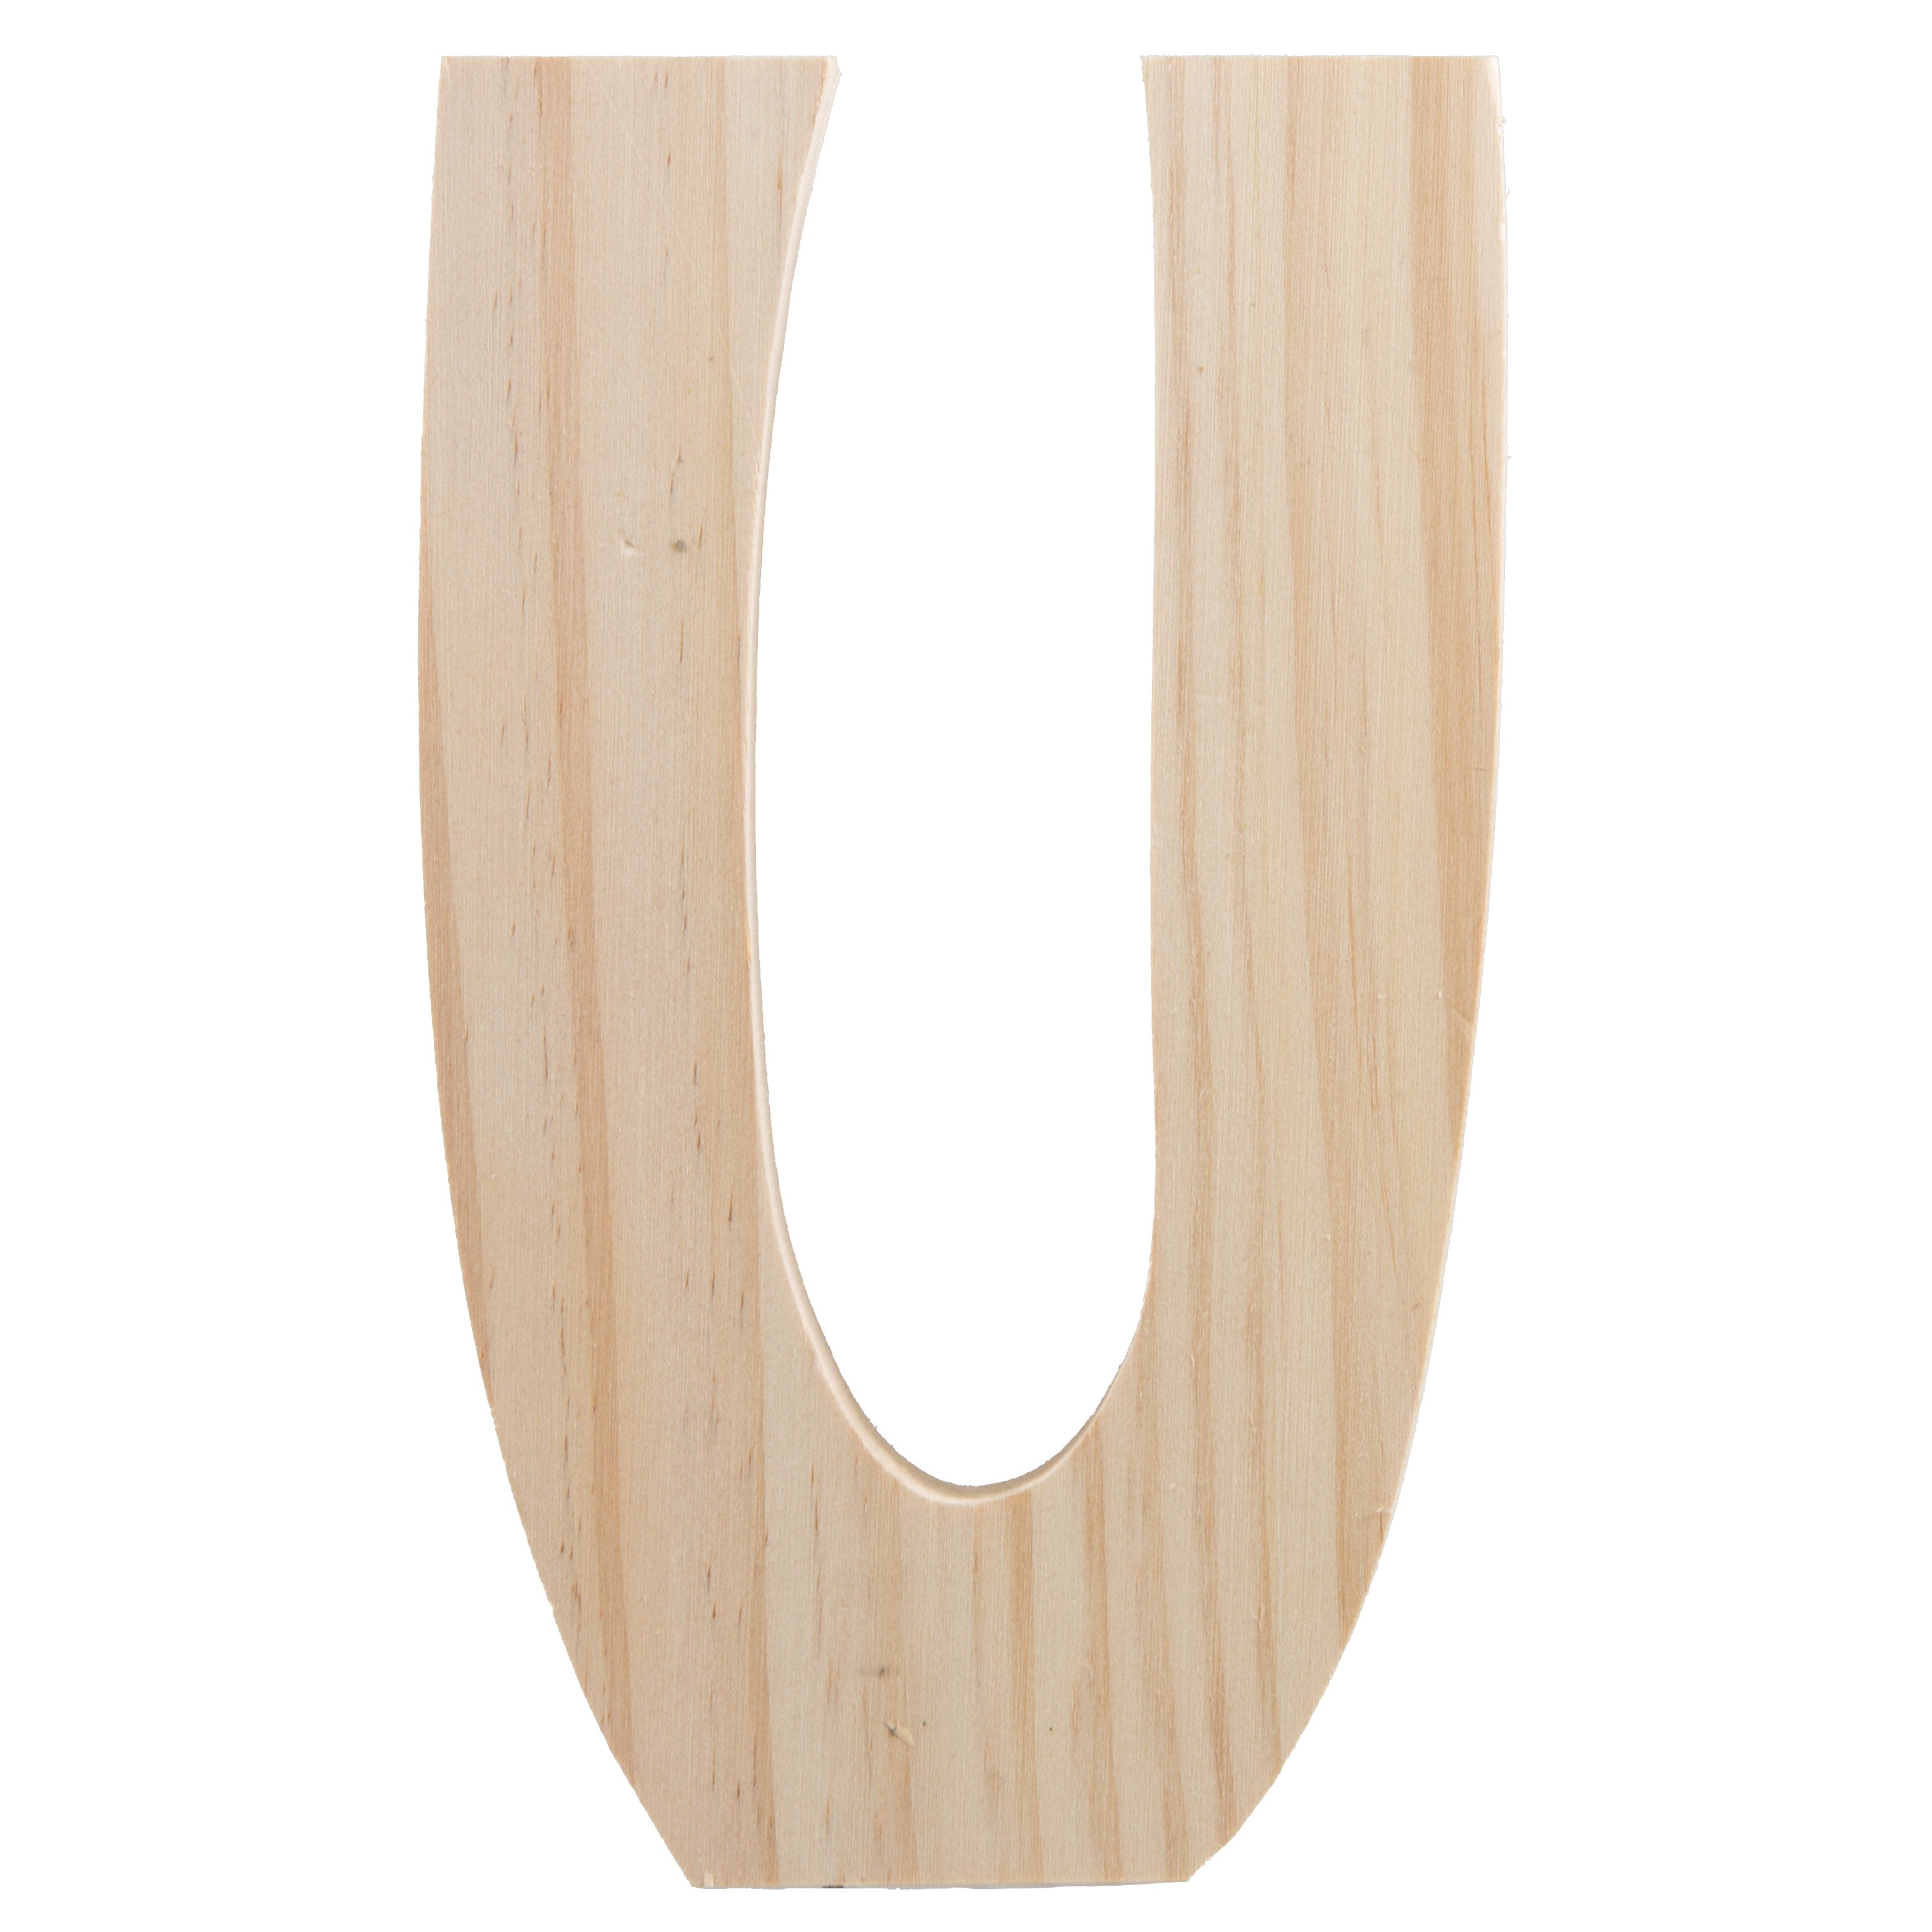 7.75" Chunky Wooden Letter: U